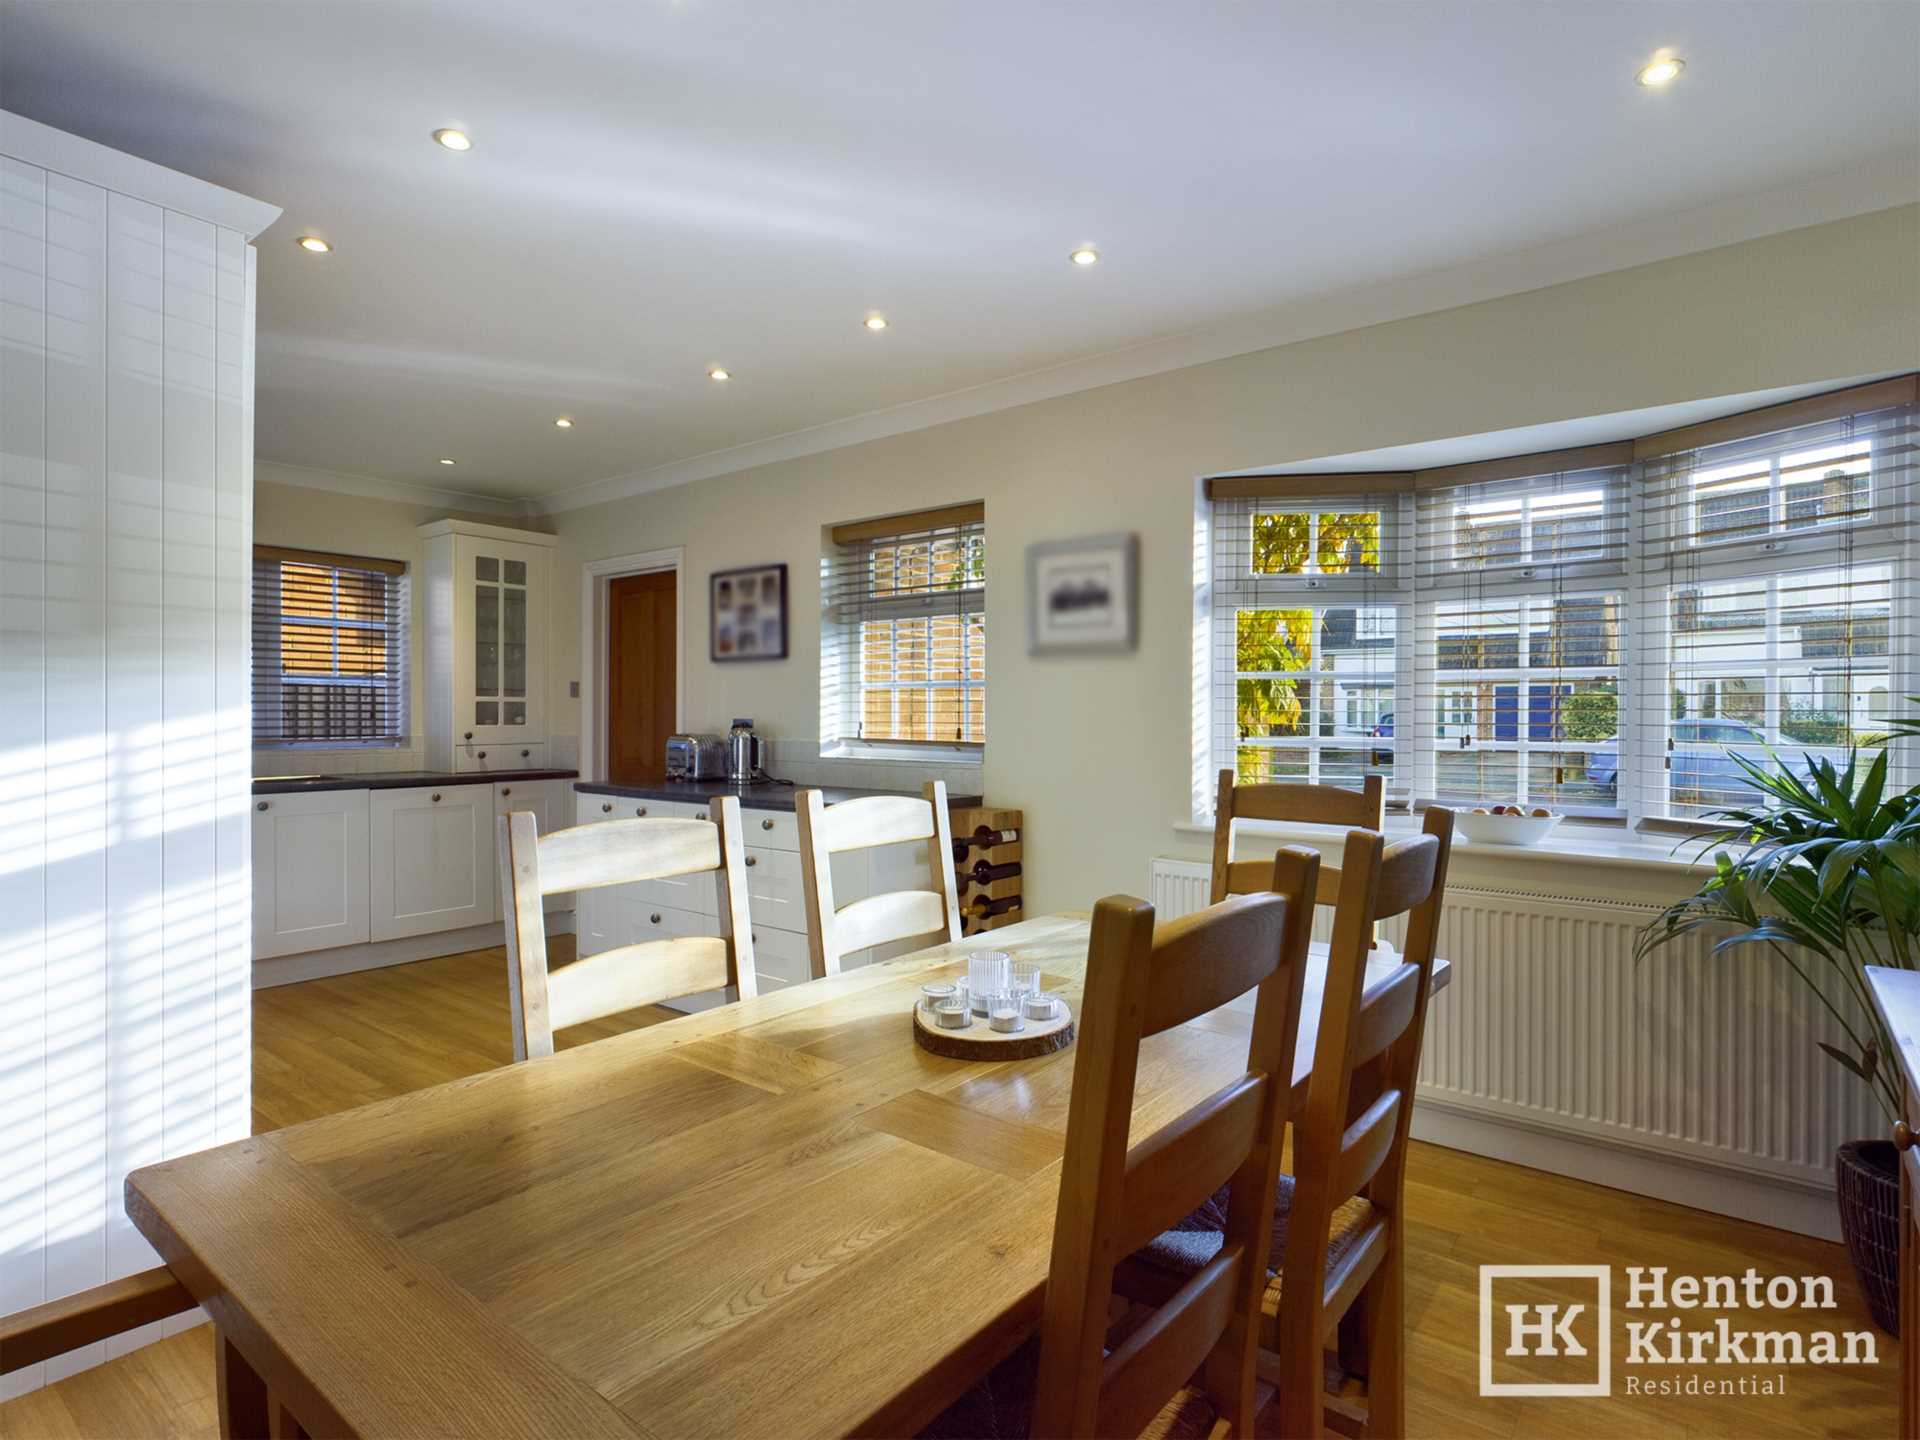 Norsey View Drive, Billericay, Image 4